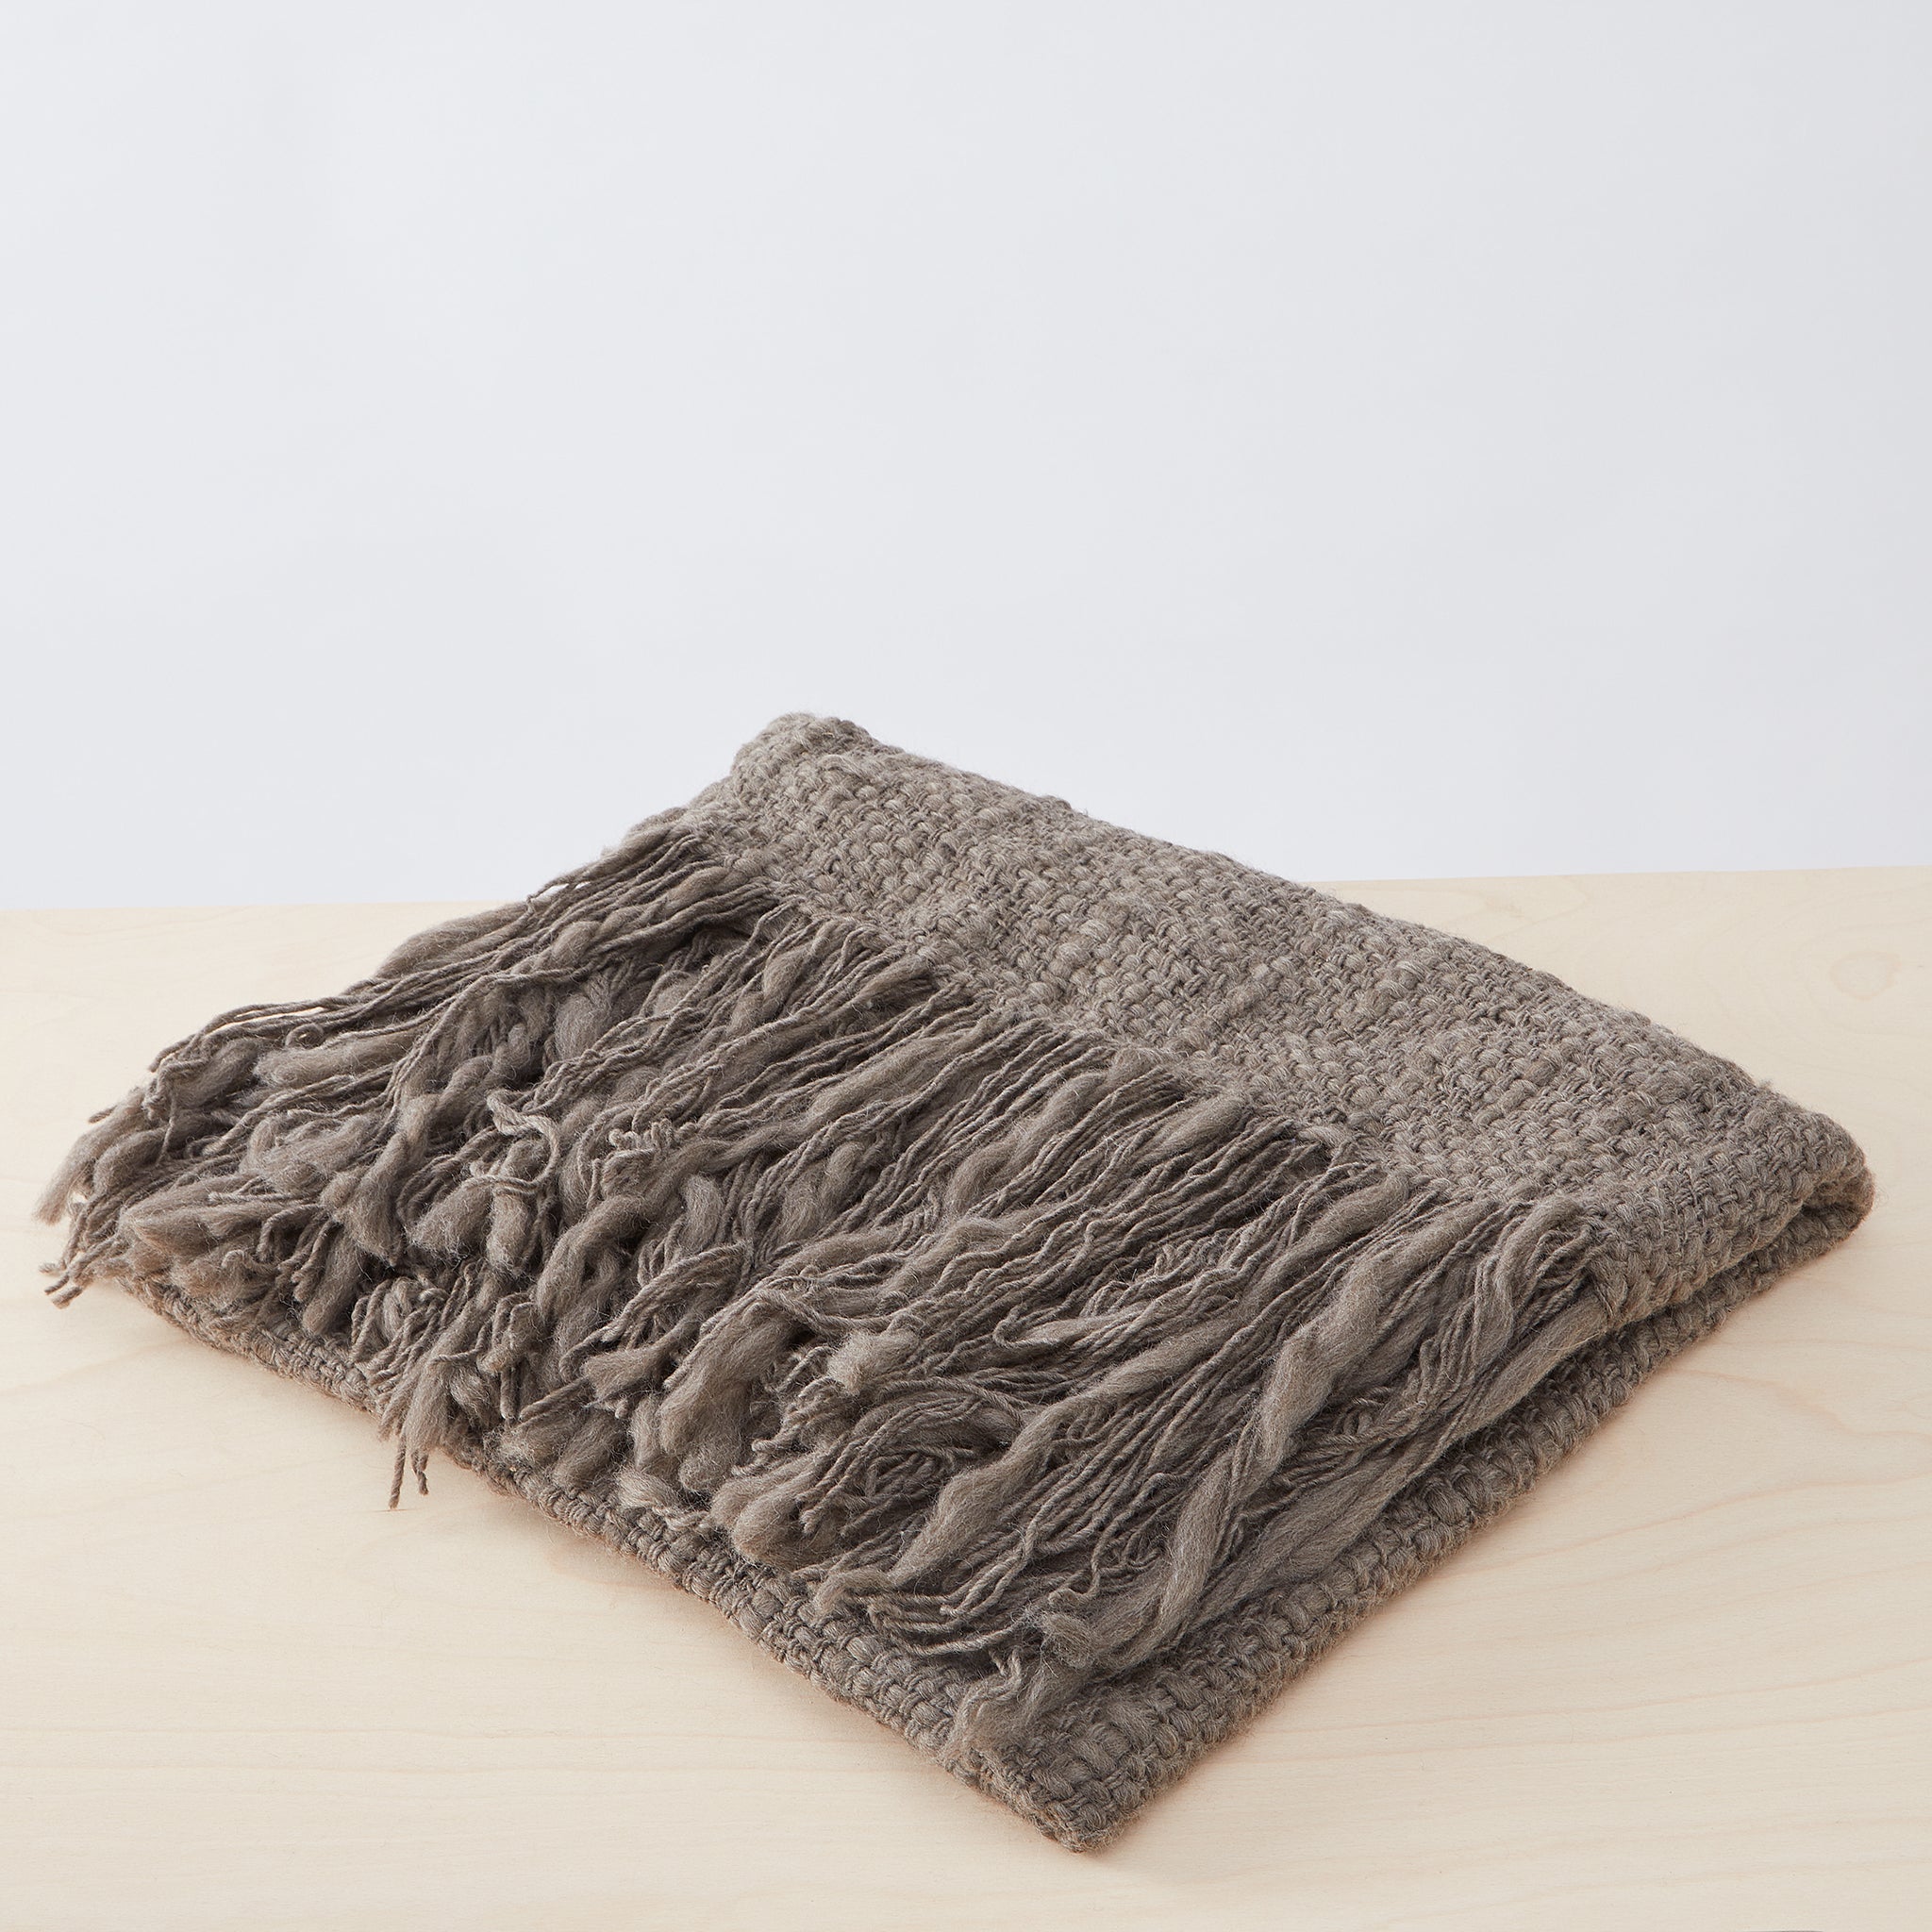 Hand-woven, heavenly soft merino blanket Sueño made from the best, untreated wool of Patagonia. These blankets are not only unique, but true works of art. Shop online now at By Native.